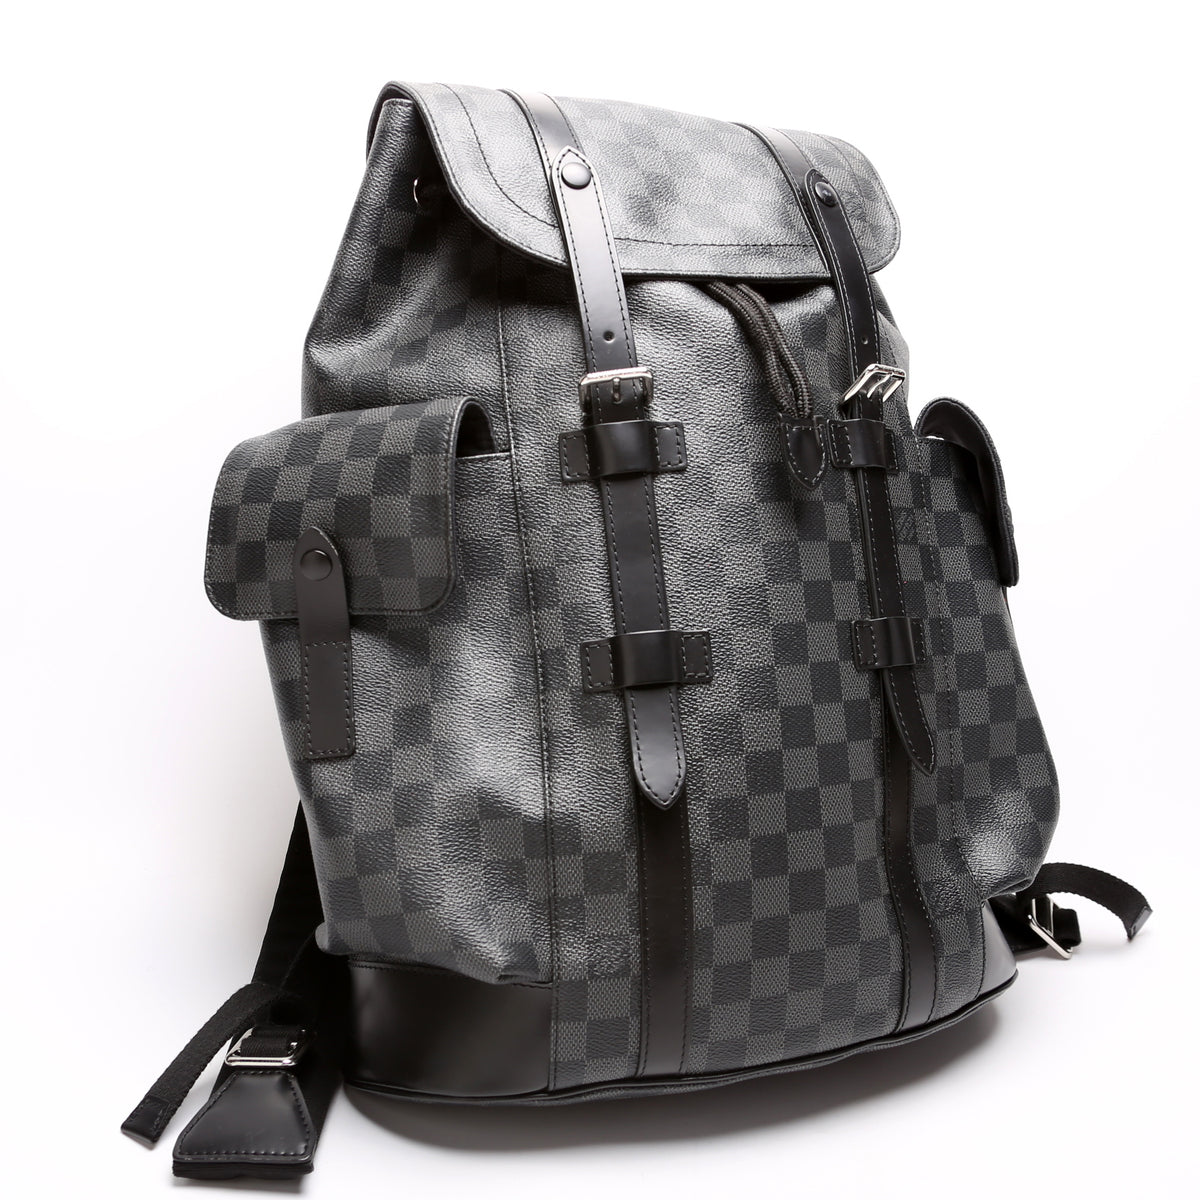 Louis Vuitton Christopher Backpack In Black And White Damier